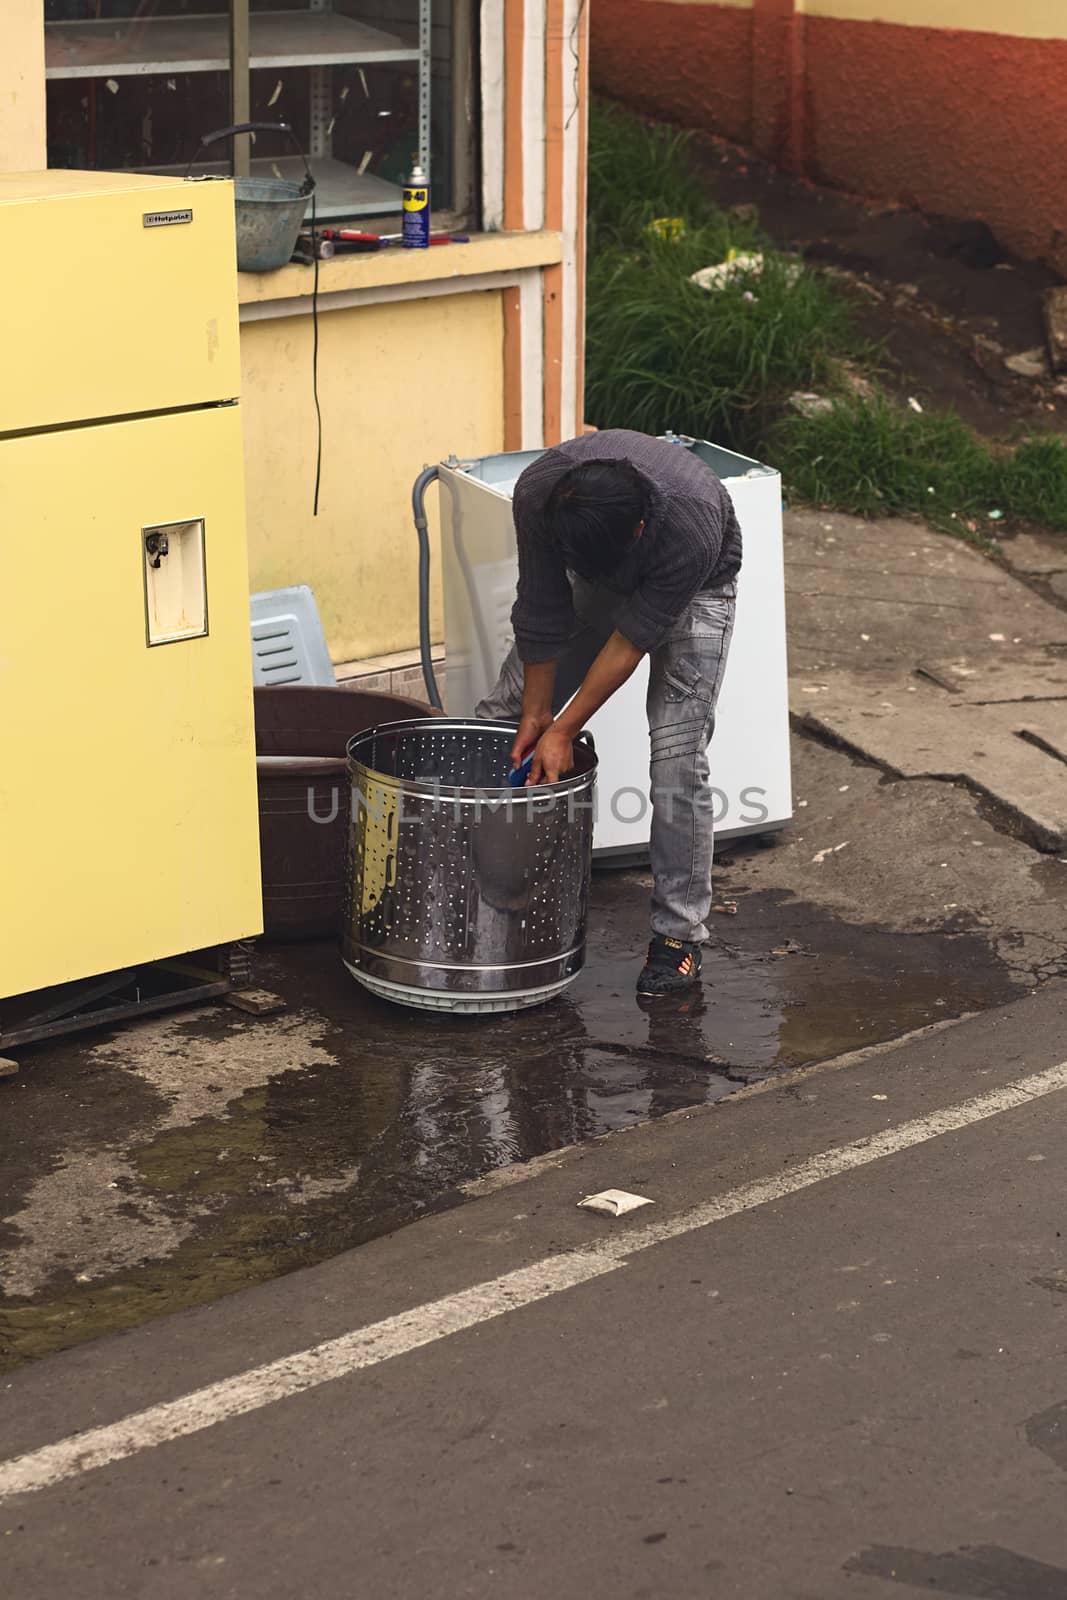 TUNGURAHUA, ECUADOR - MAY 12, 2014: Unidentified person cleaning a washing drum with water and brush on the roadside along the road between Ambato and Banos on May 12, 2014 in Tungurahua Province, Ecuador